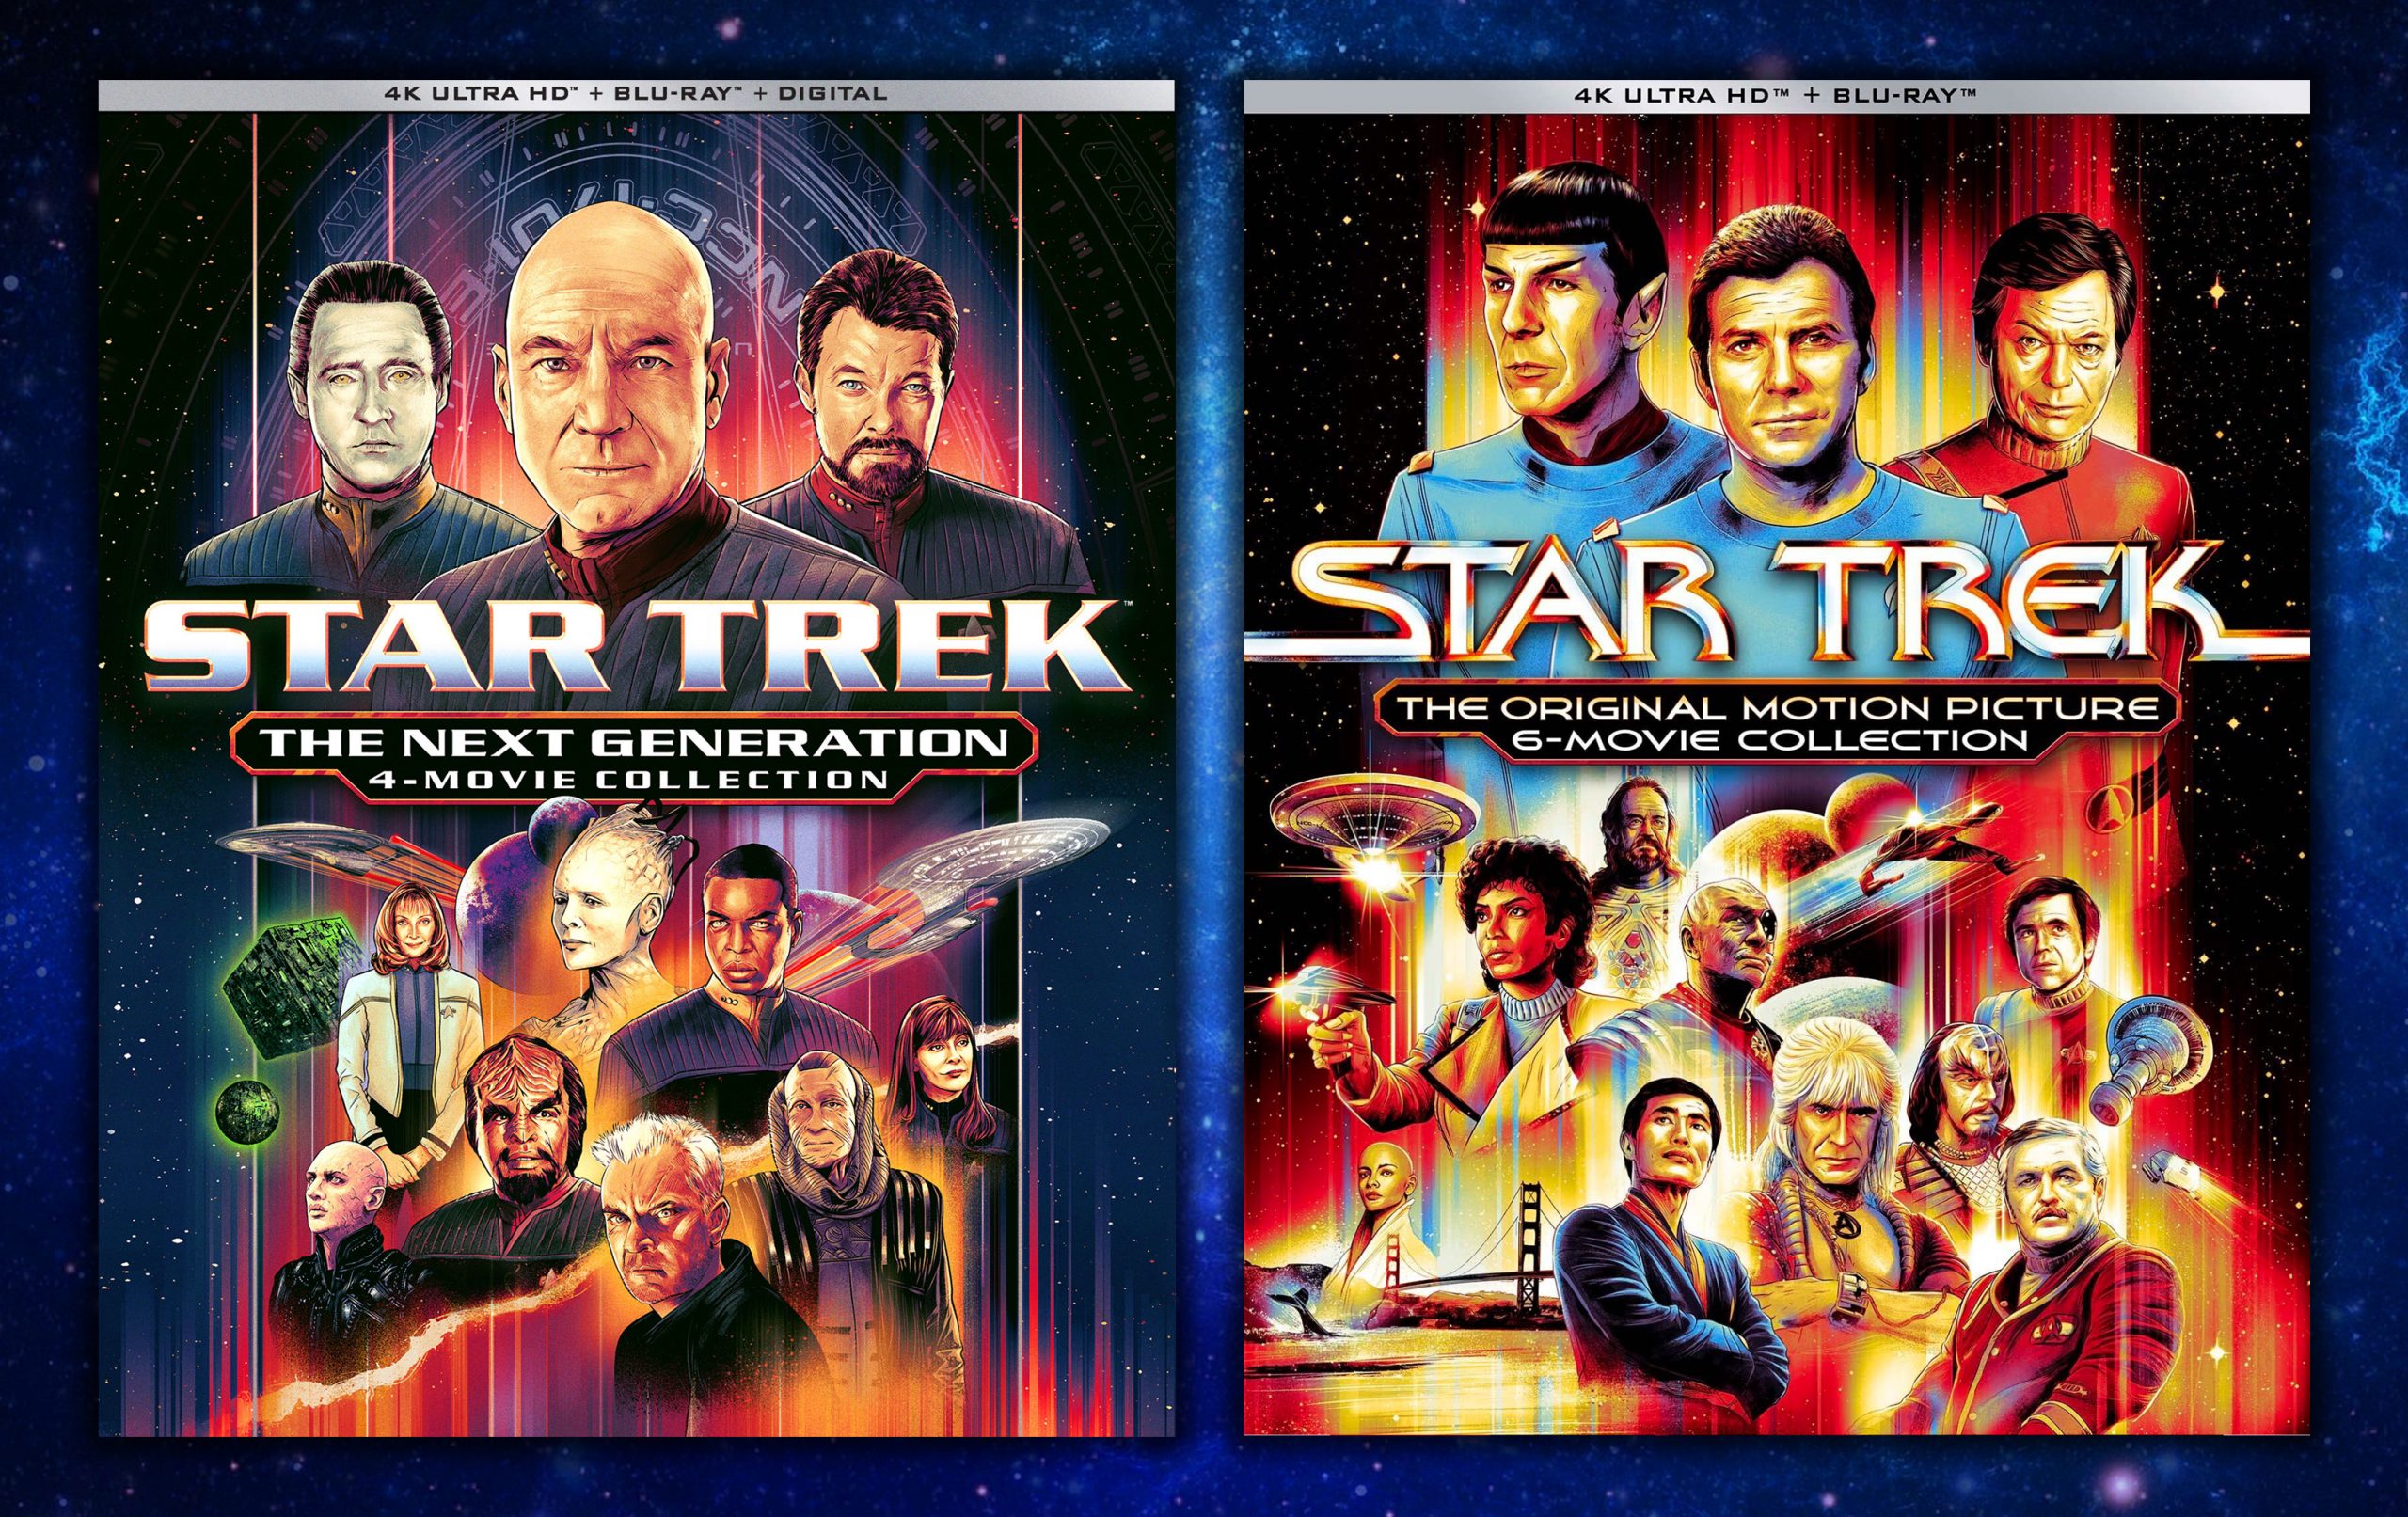 Star Trek: The Next Generation – 4-Movie Collection and Star Trek: The Original Motion Picture 6-Movie Collection